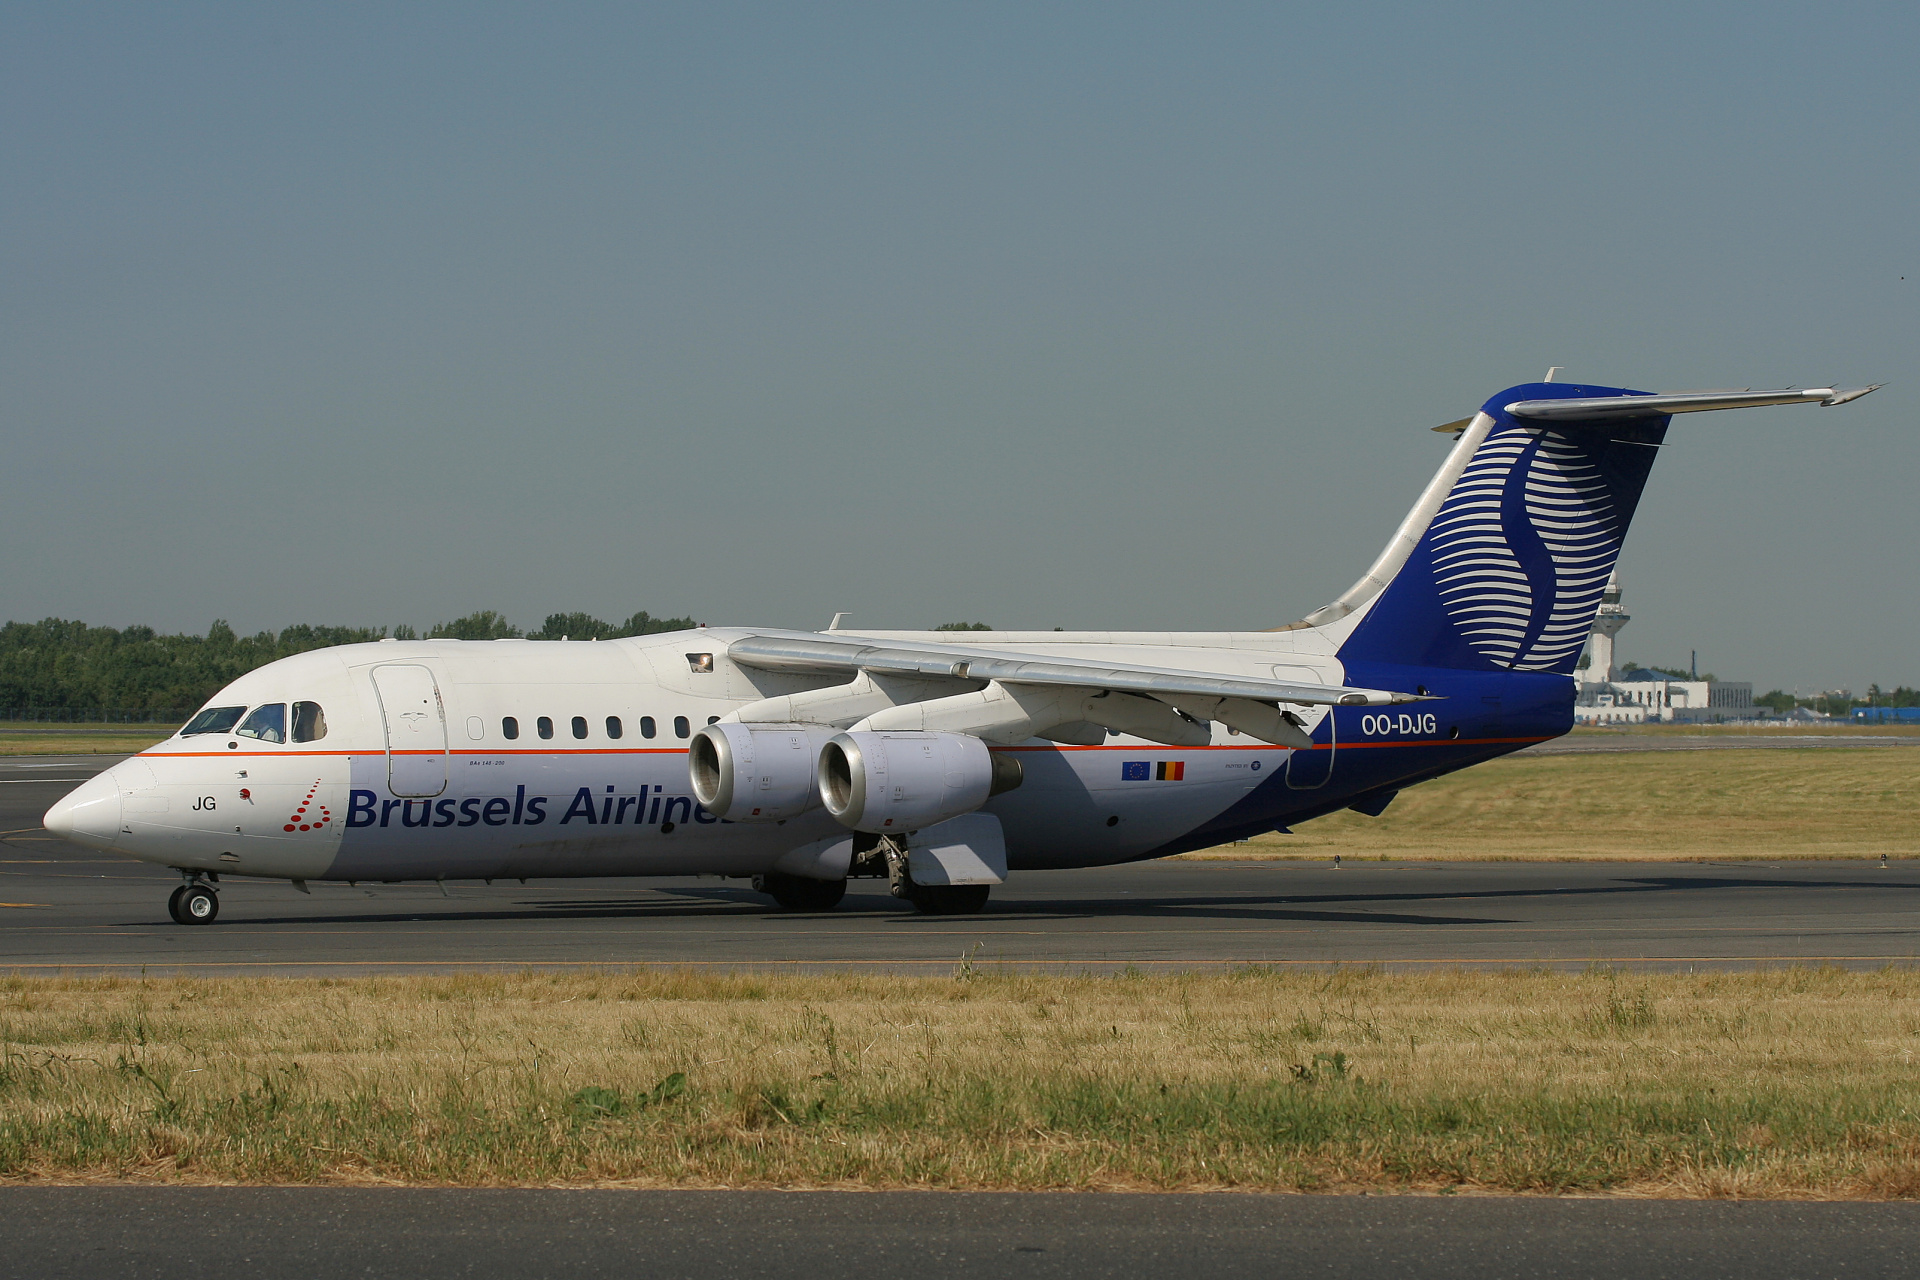 146-200, OO-DJG, Brussels Airlines (Sabena) (Aircraft » EPWA Spotting » BAe 146 and revisions)